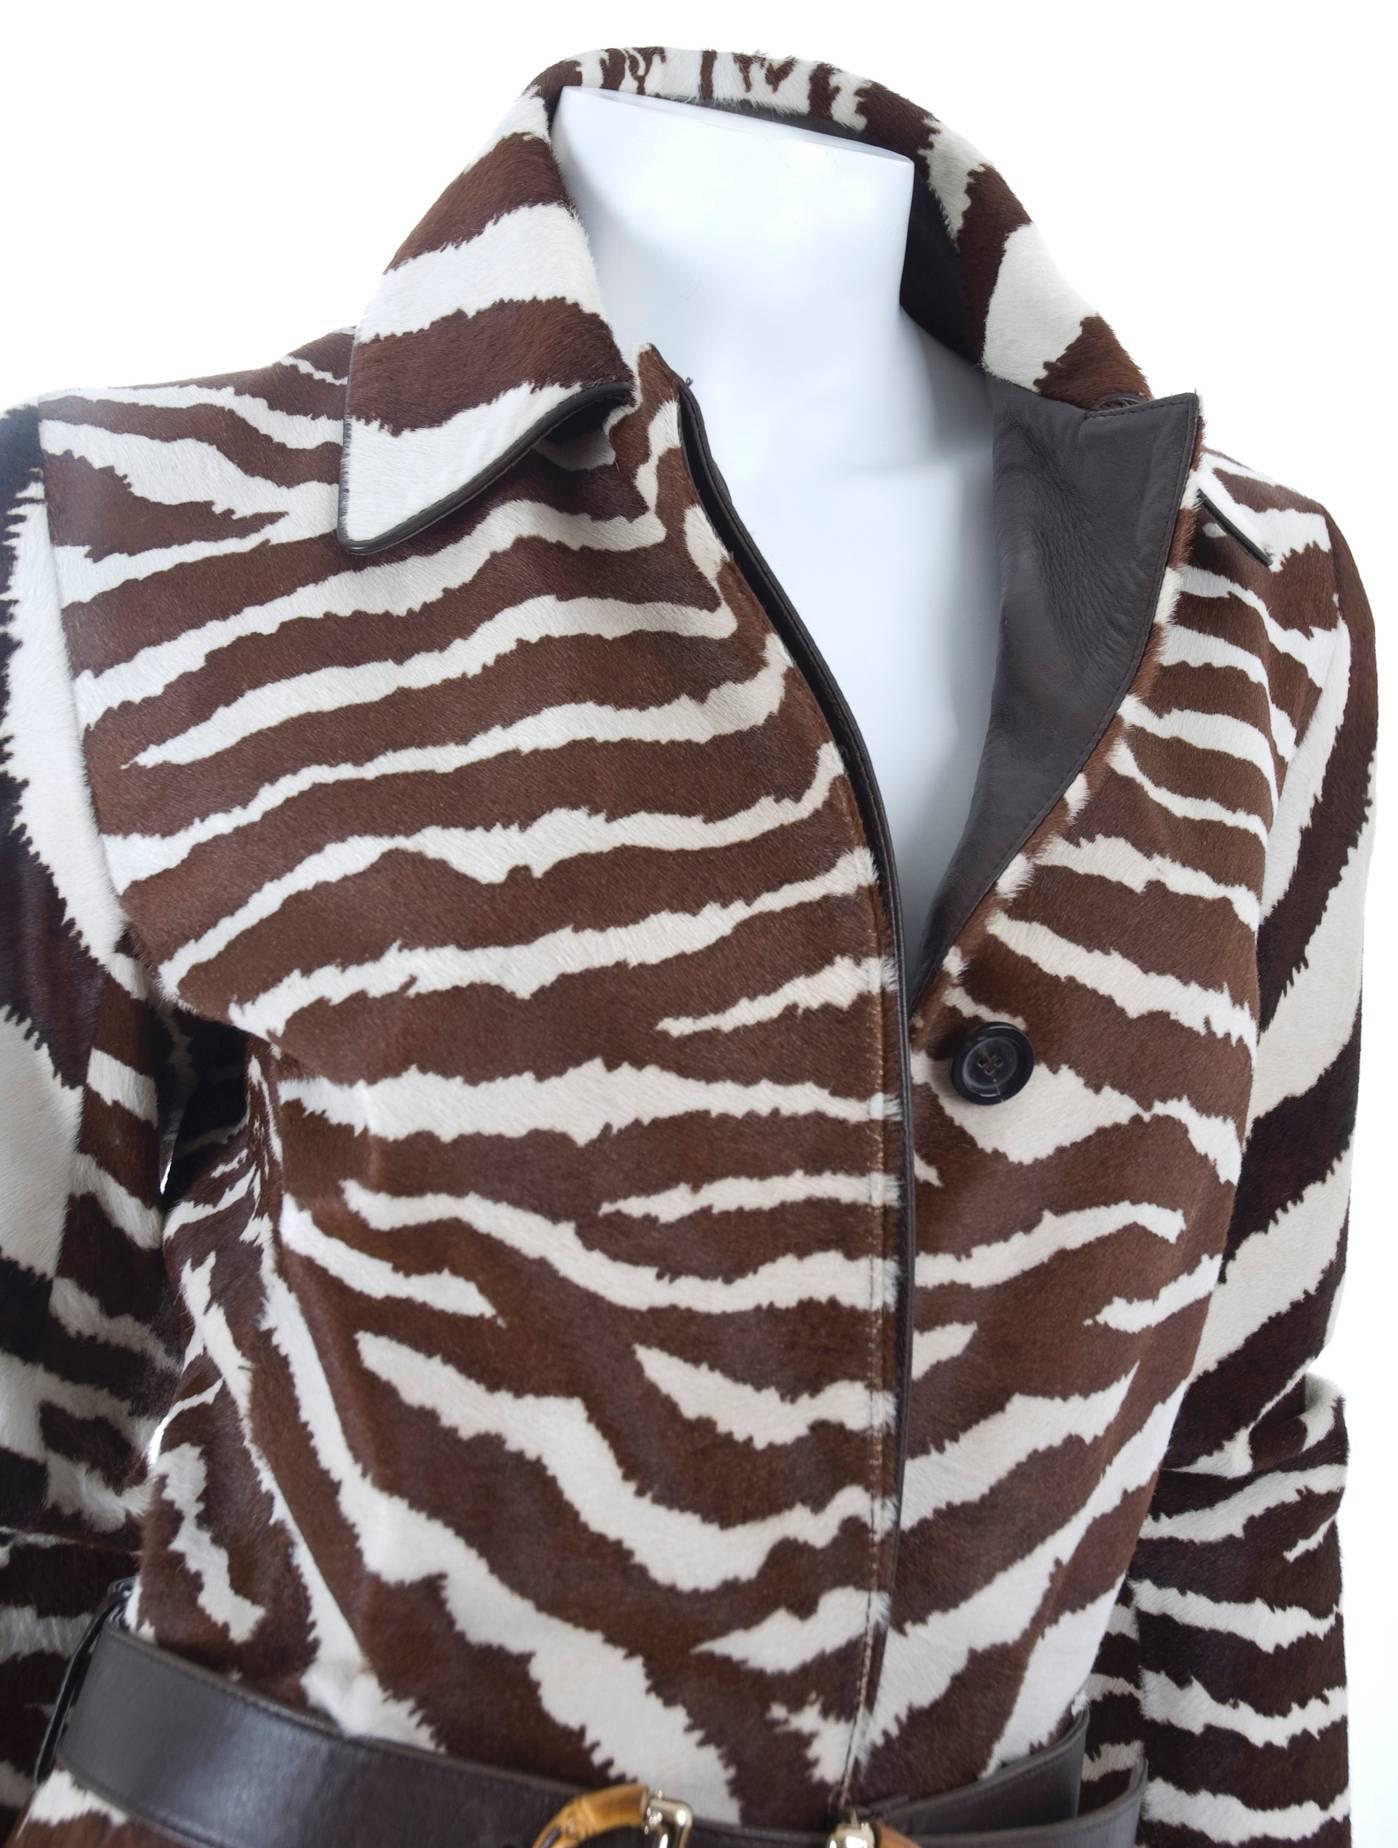 Women's Gucci Zebra Calf Hair Coat with Brown Leather Trim